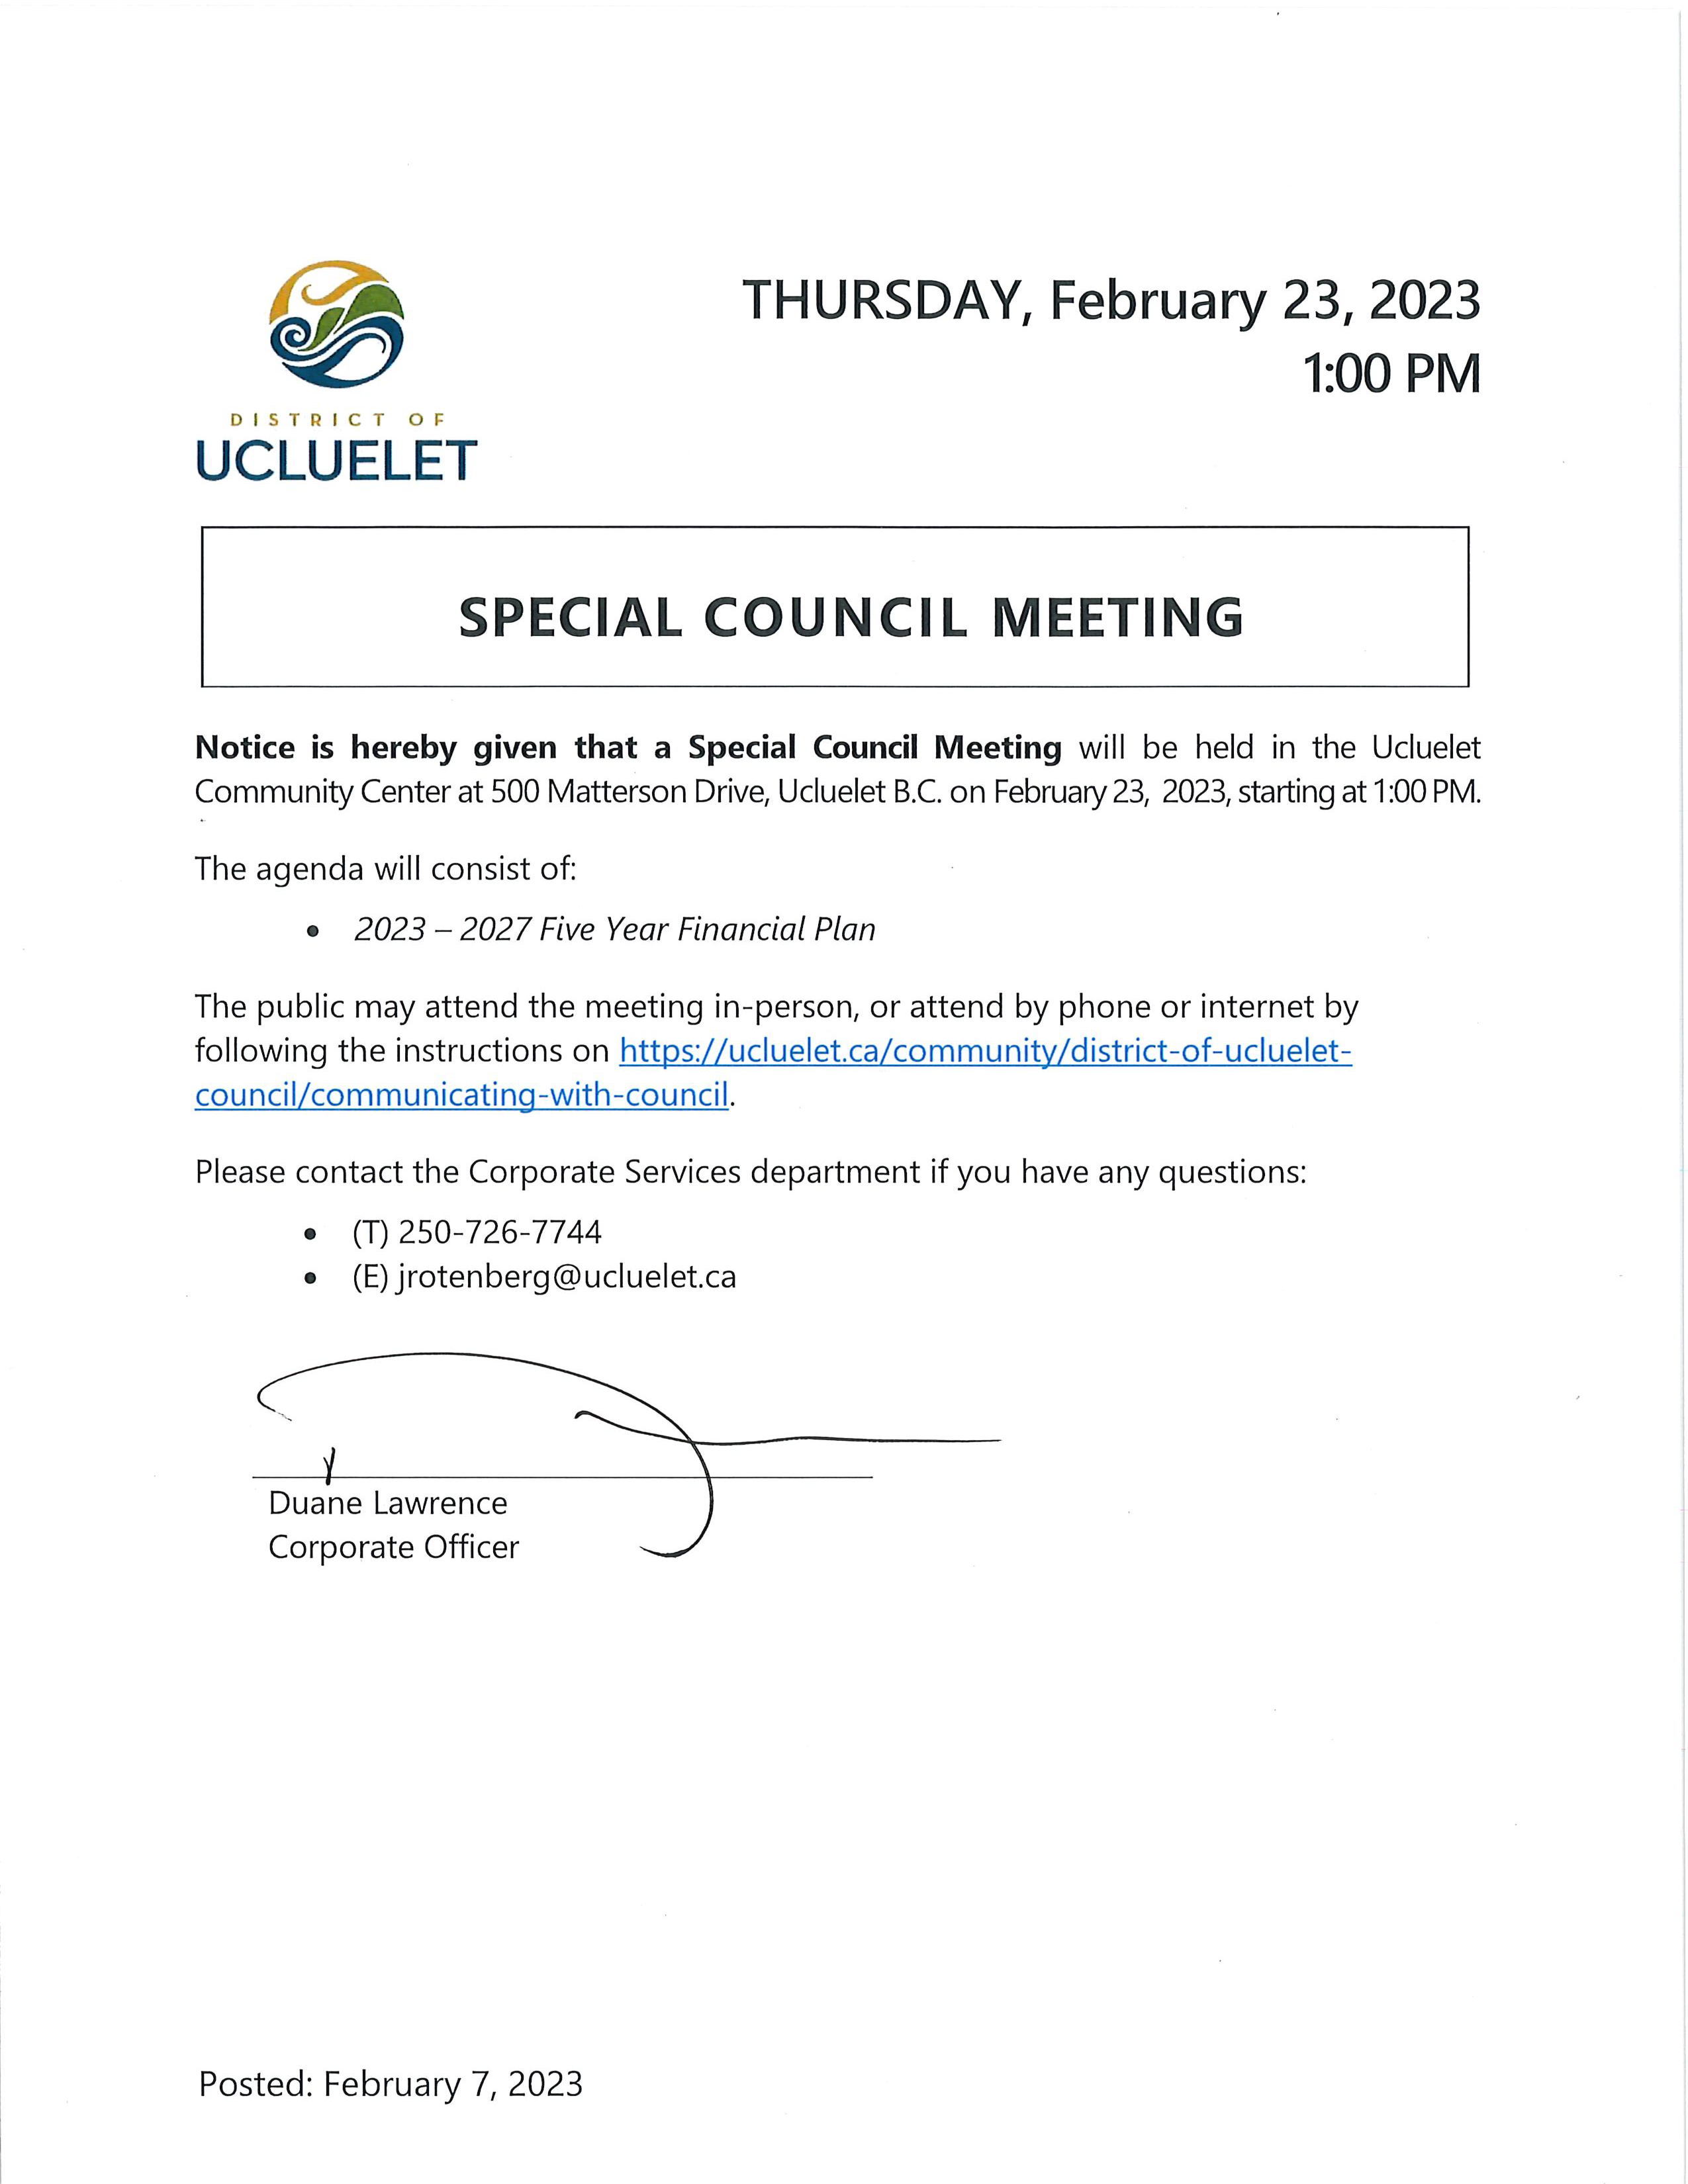 2023-02-23_Notice_of_Special_Council_Meeting.png